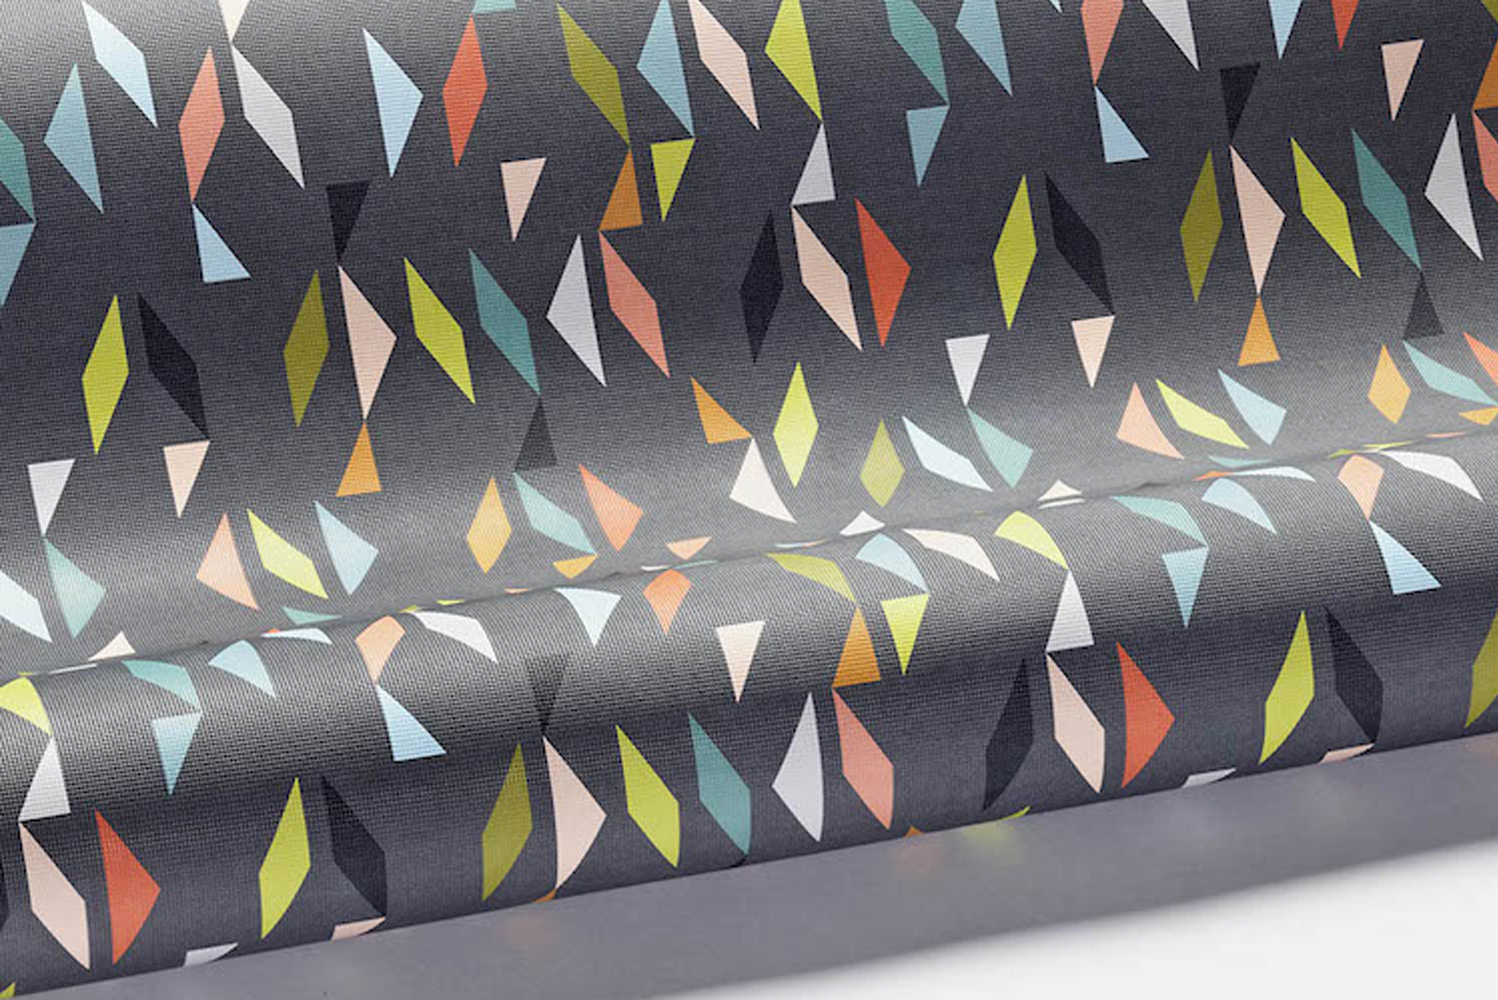 Introducing Fragment one of the newest collections of textiles from US-based textile and wallcovering company Arc-Com